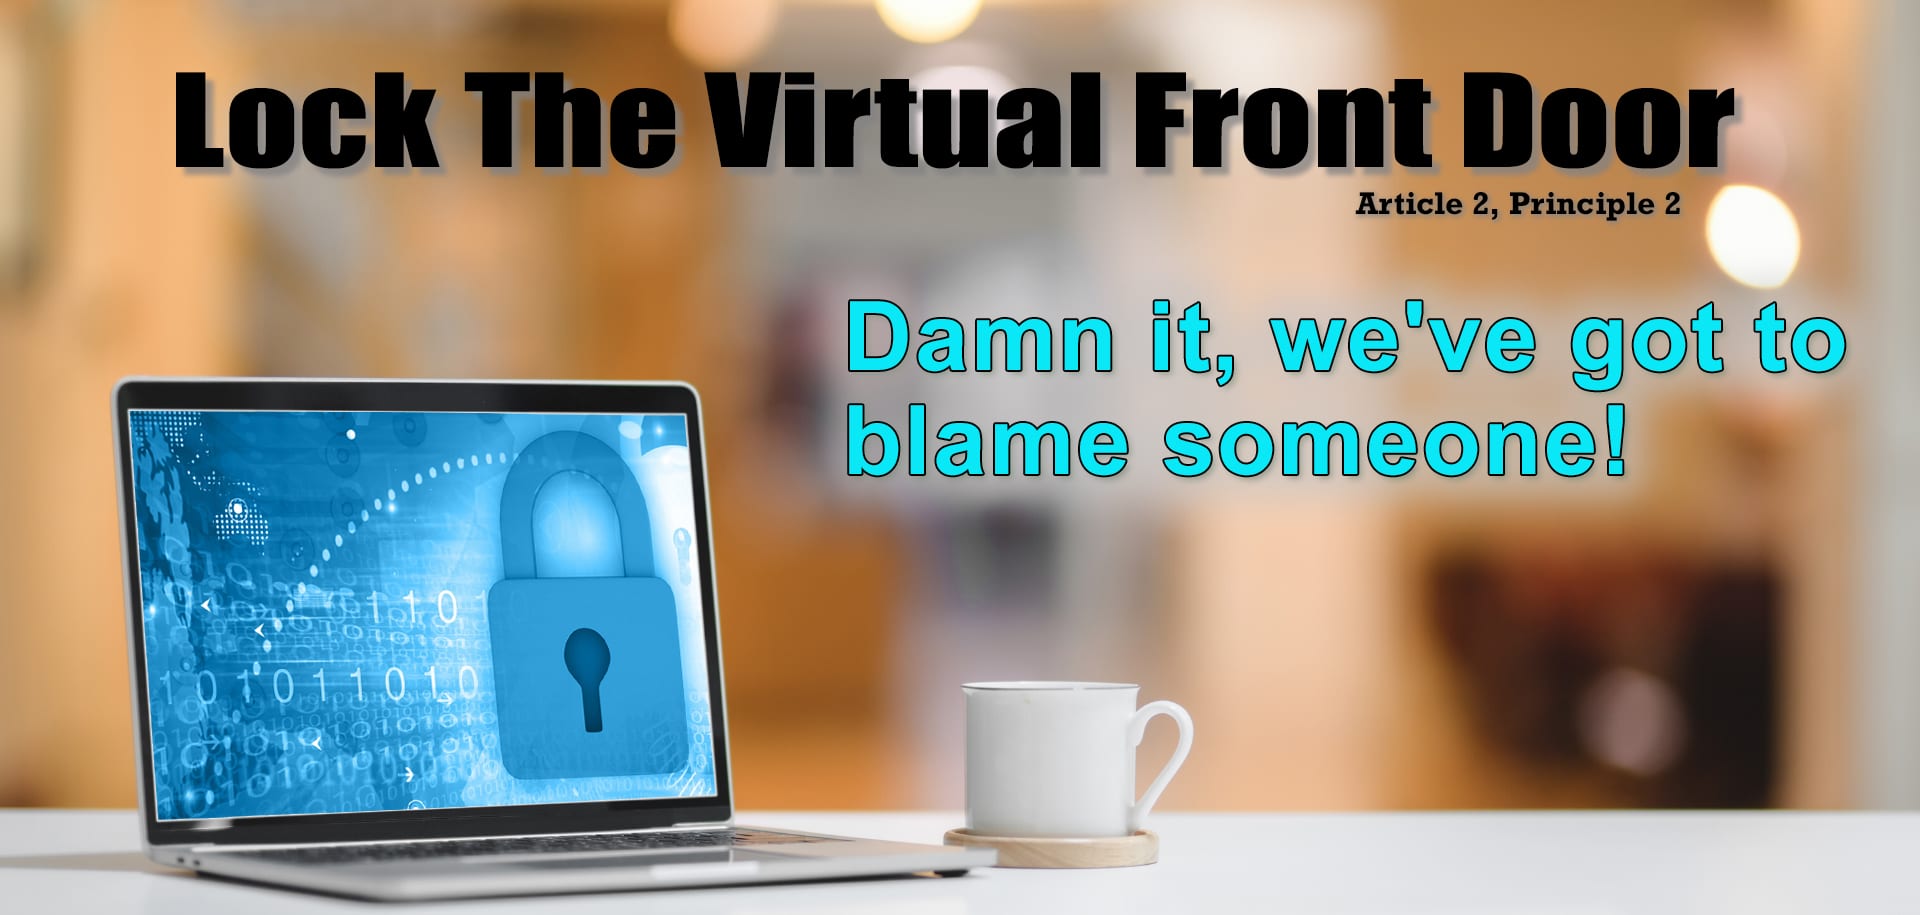 The first video of the cybersecurity tips series "Lock Your Virtual Front Door." The image shows a young woman with her left hand on the side of her face, eyes wide open, mouth open with the expression of surprise and happyness.